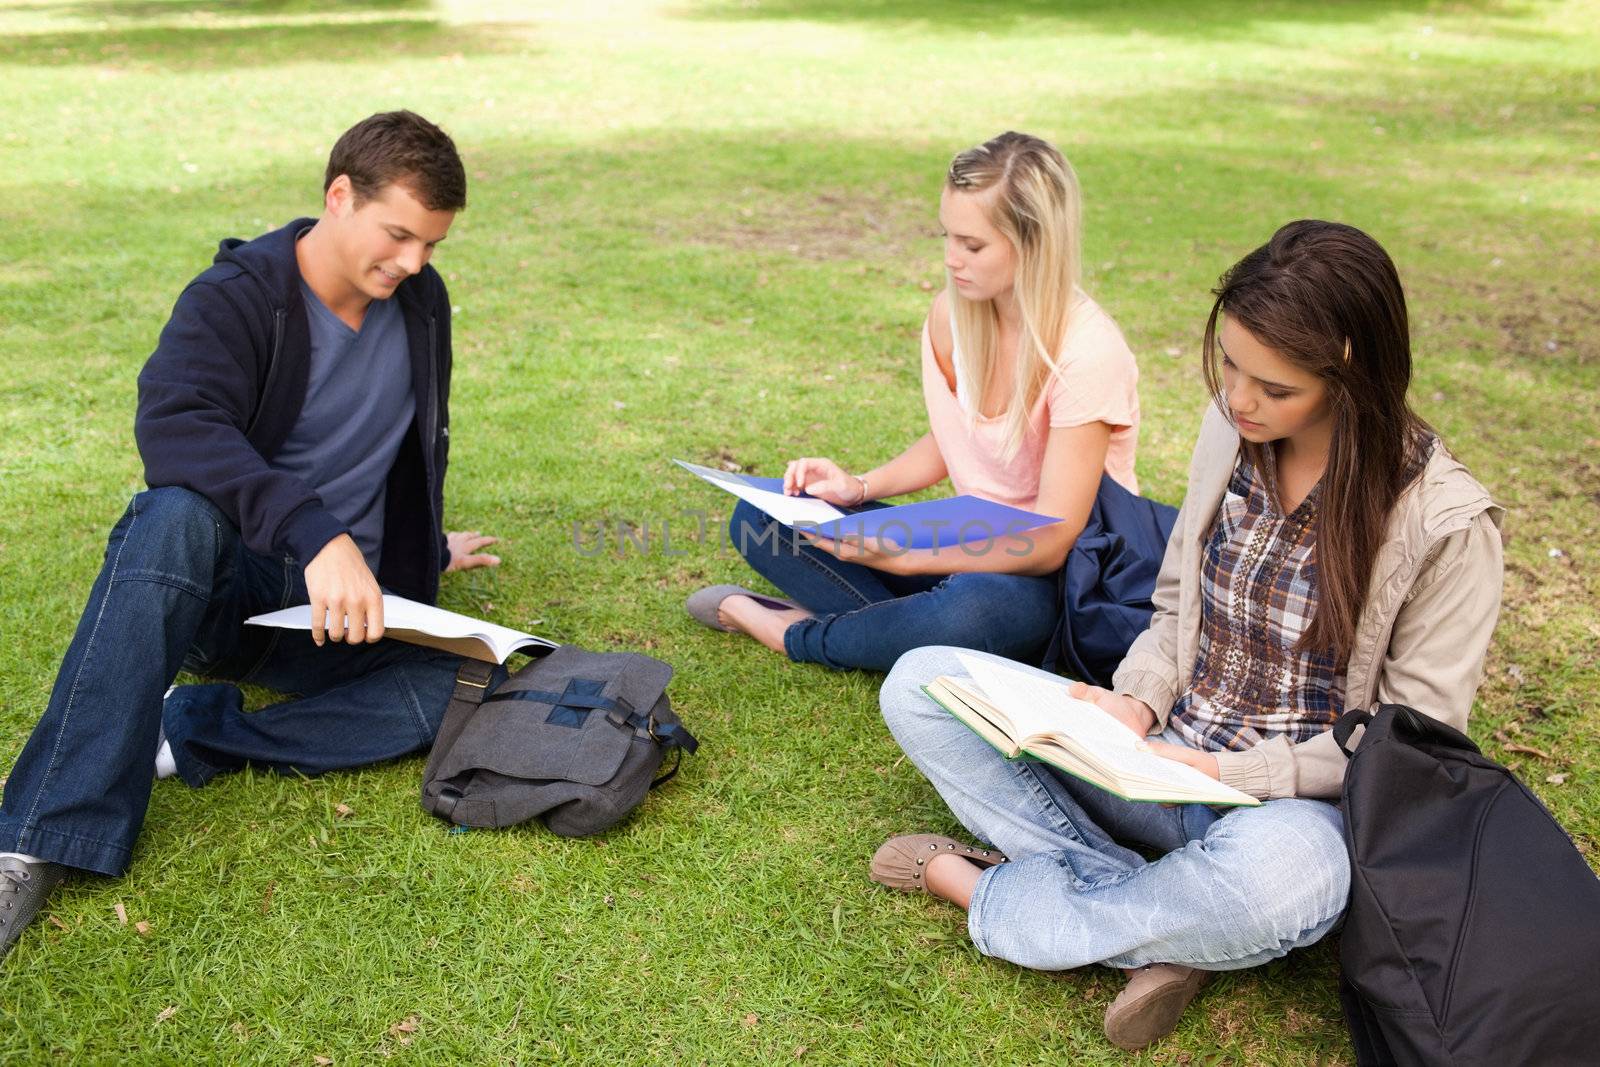 Three students studying together by Wavebreakmedia